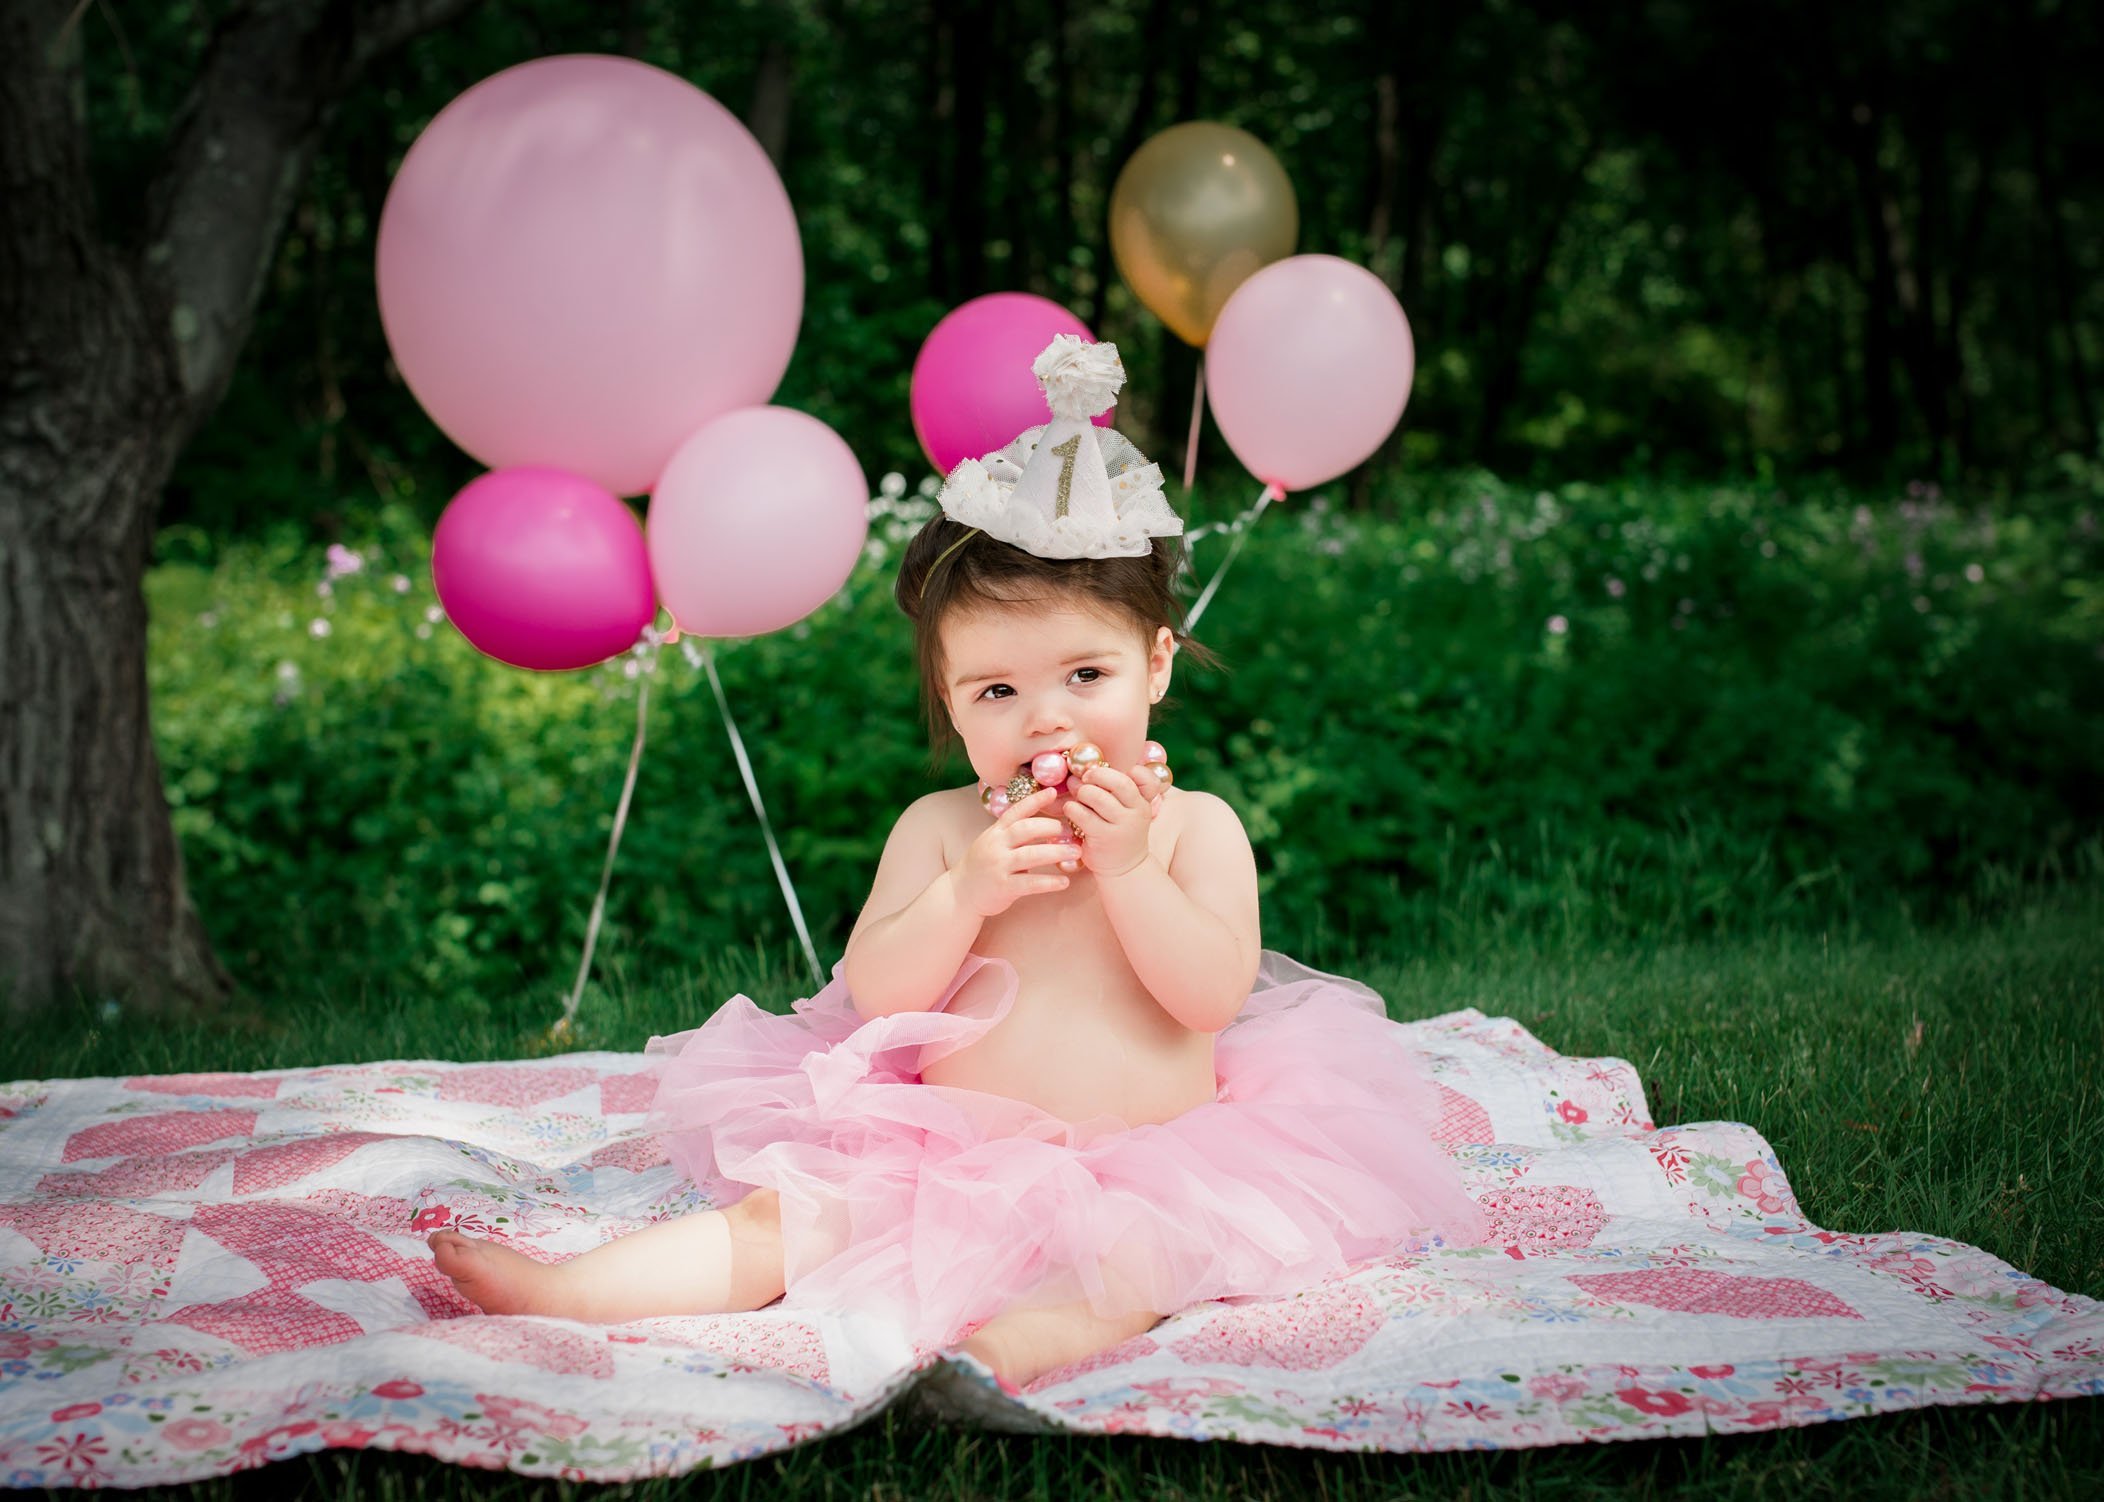 one year old girl chewing on a necklace wearing a tutu with balloons in the background